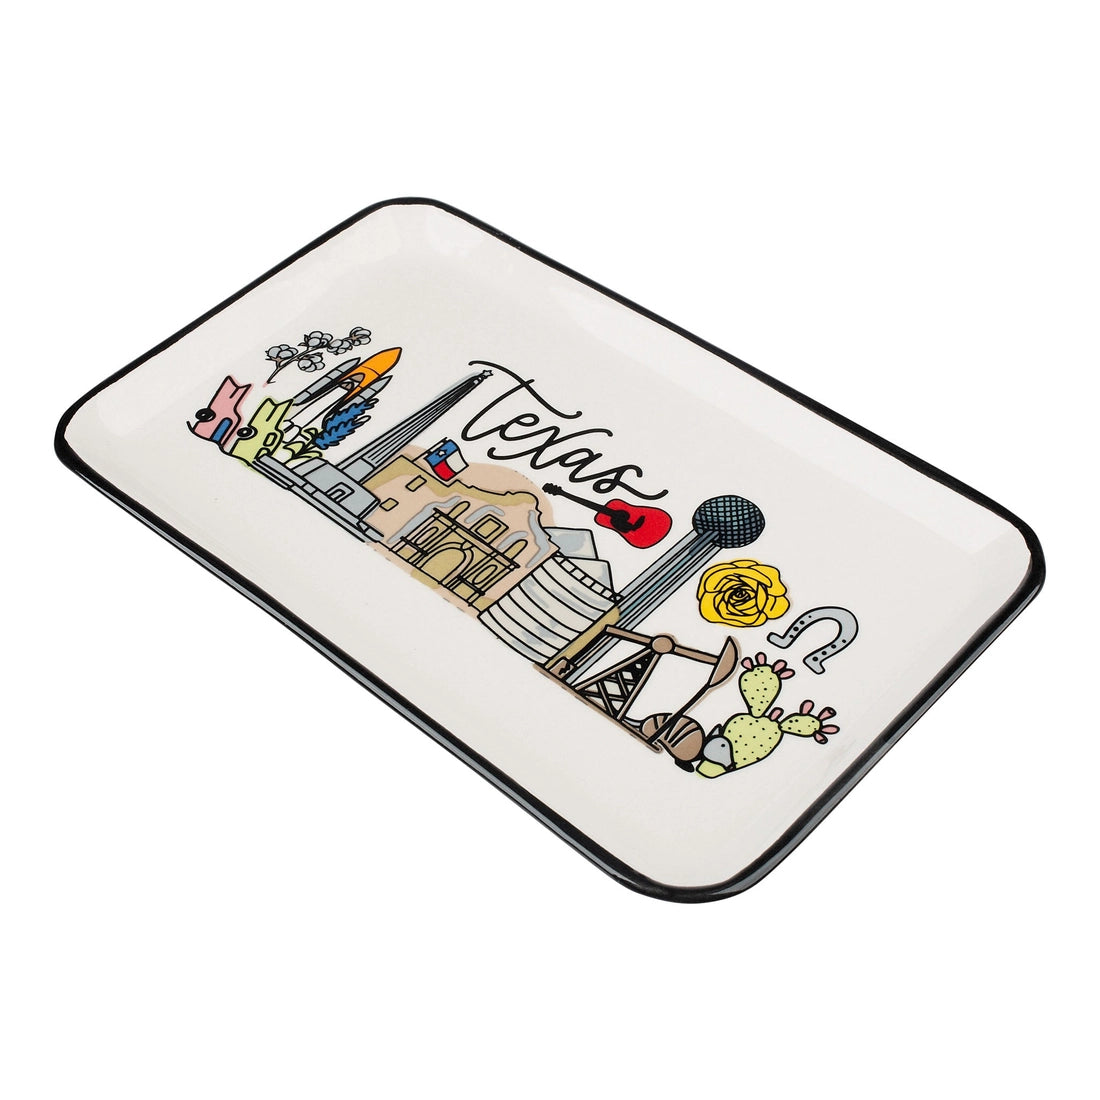 State of Texas Trinket Tray